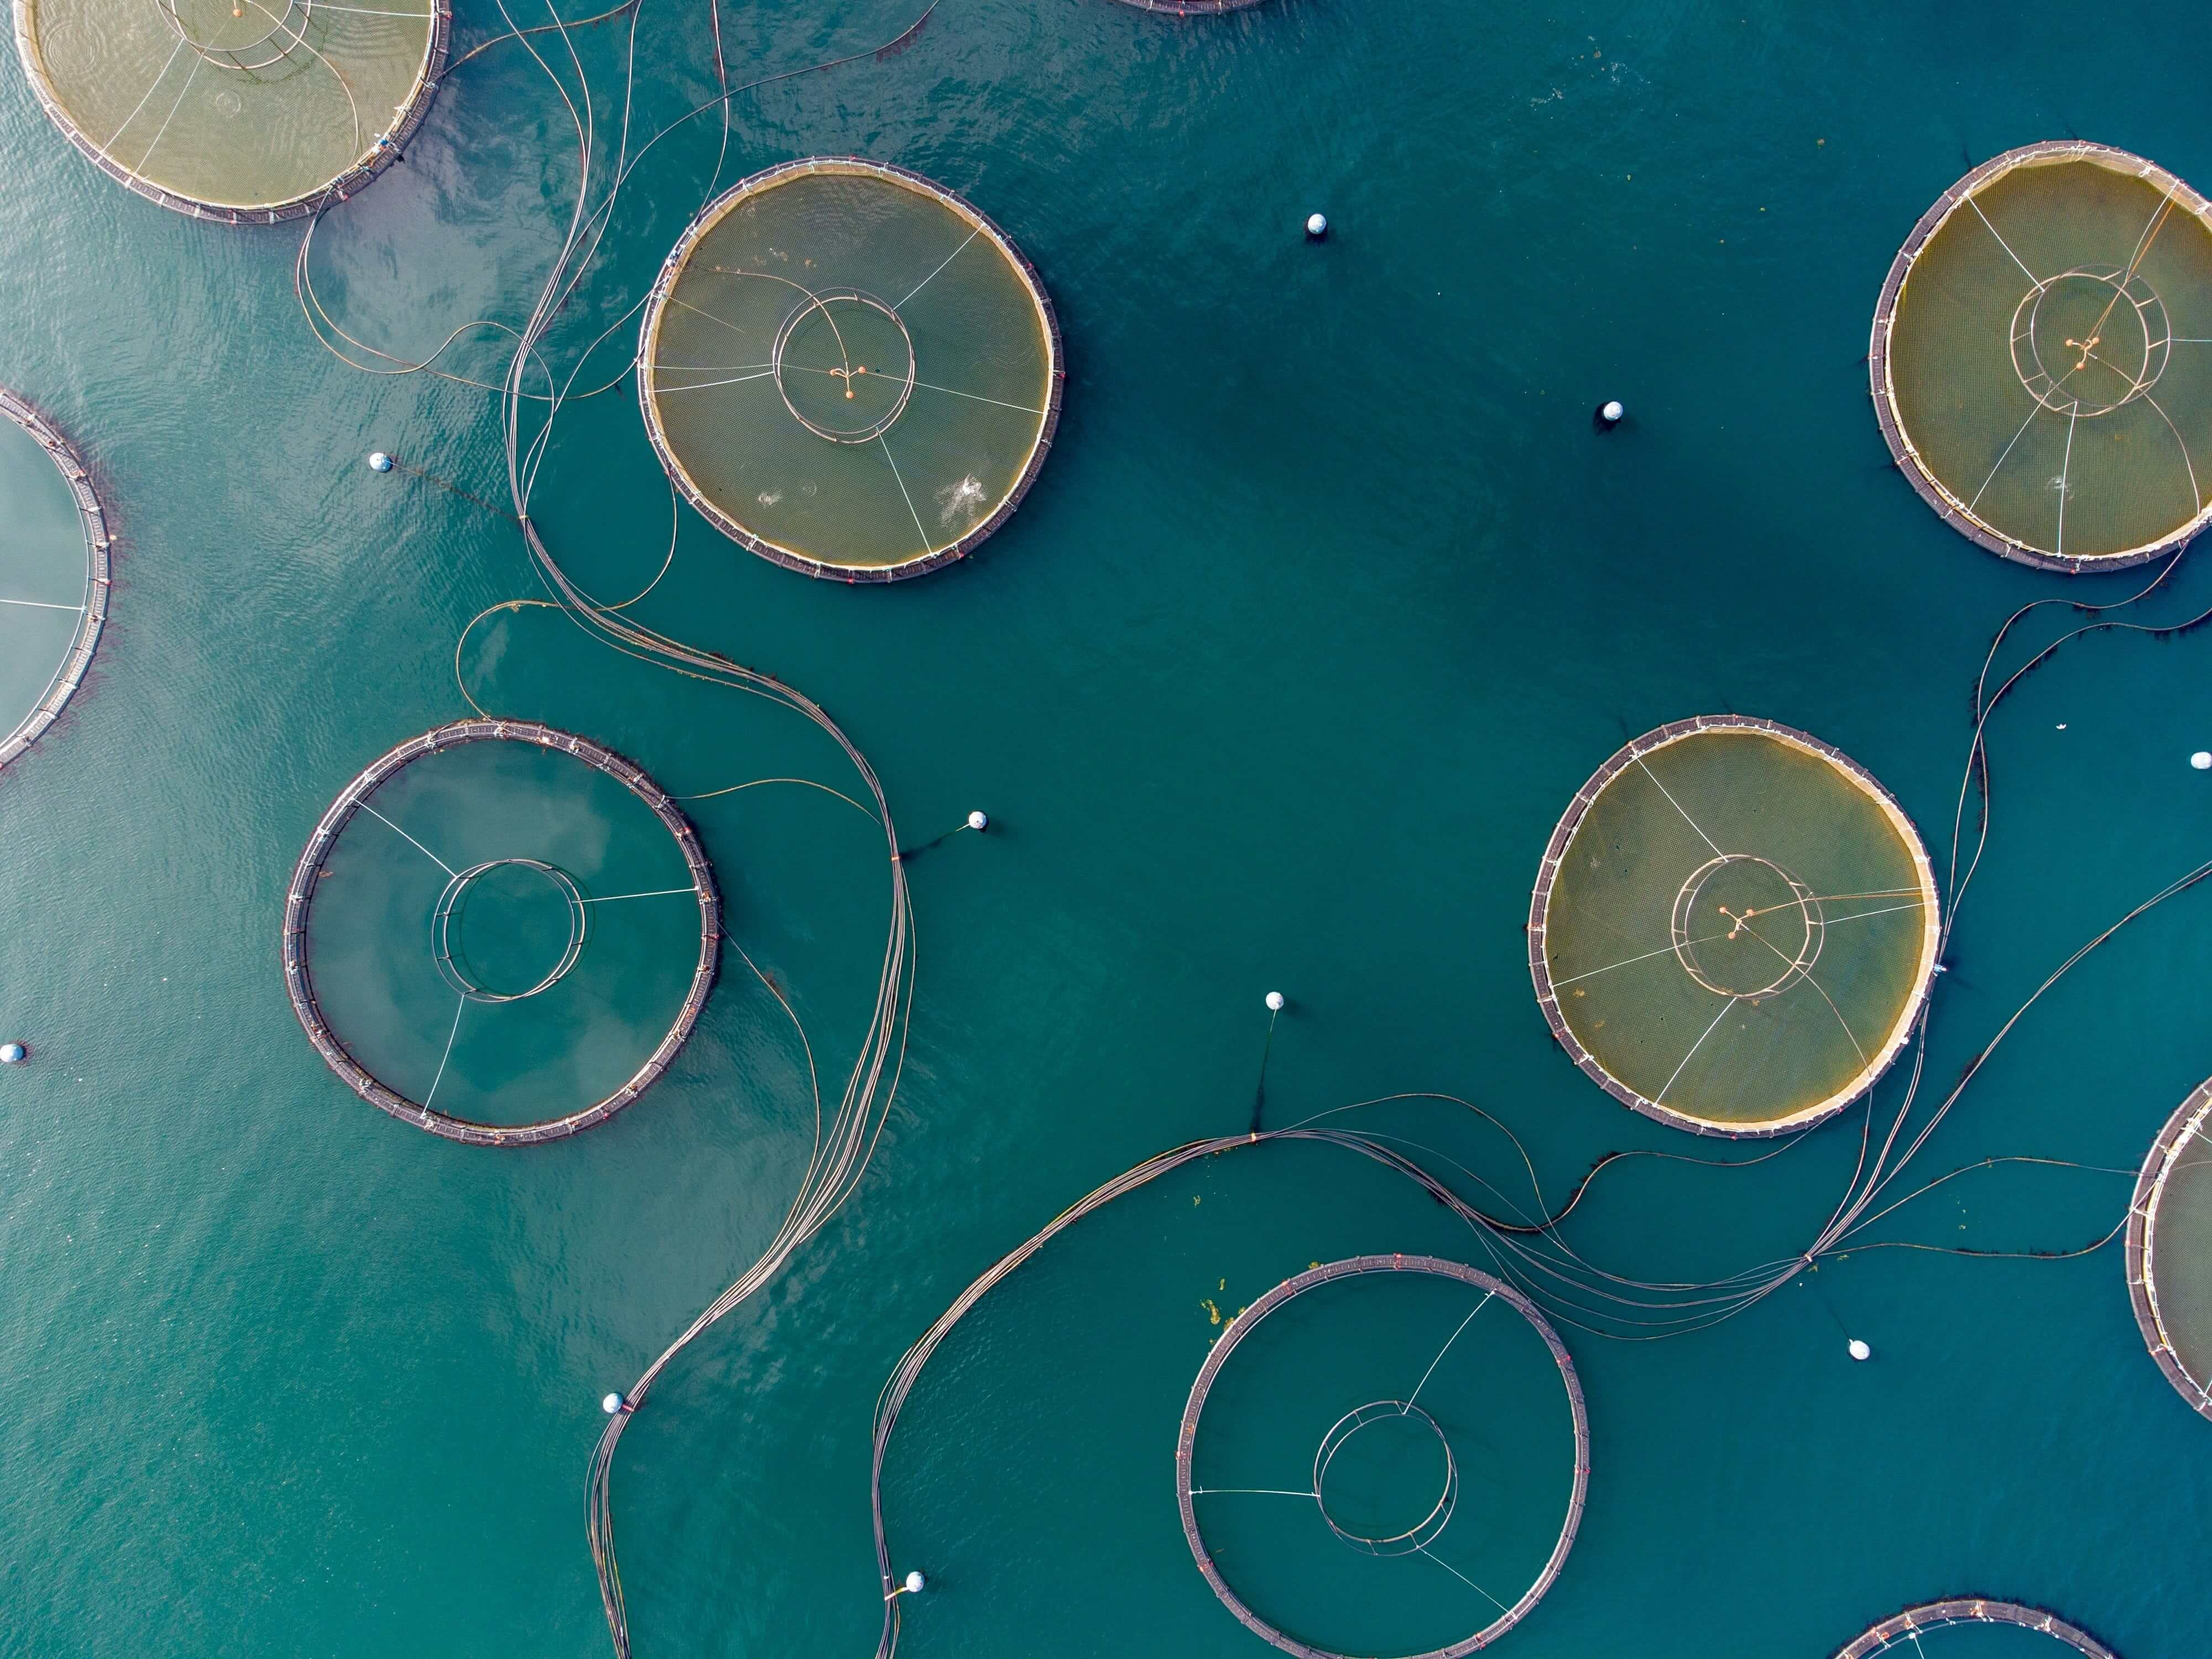 Charting Aquaculture’s Course Sustainable Growth and Talent Dynamics